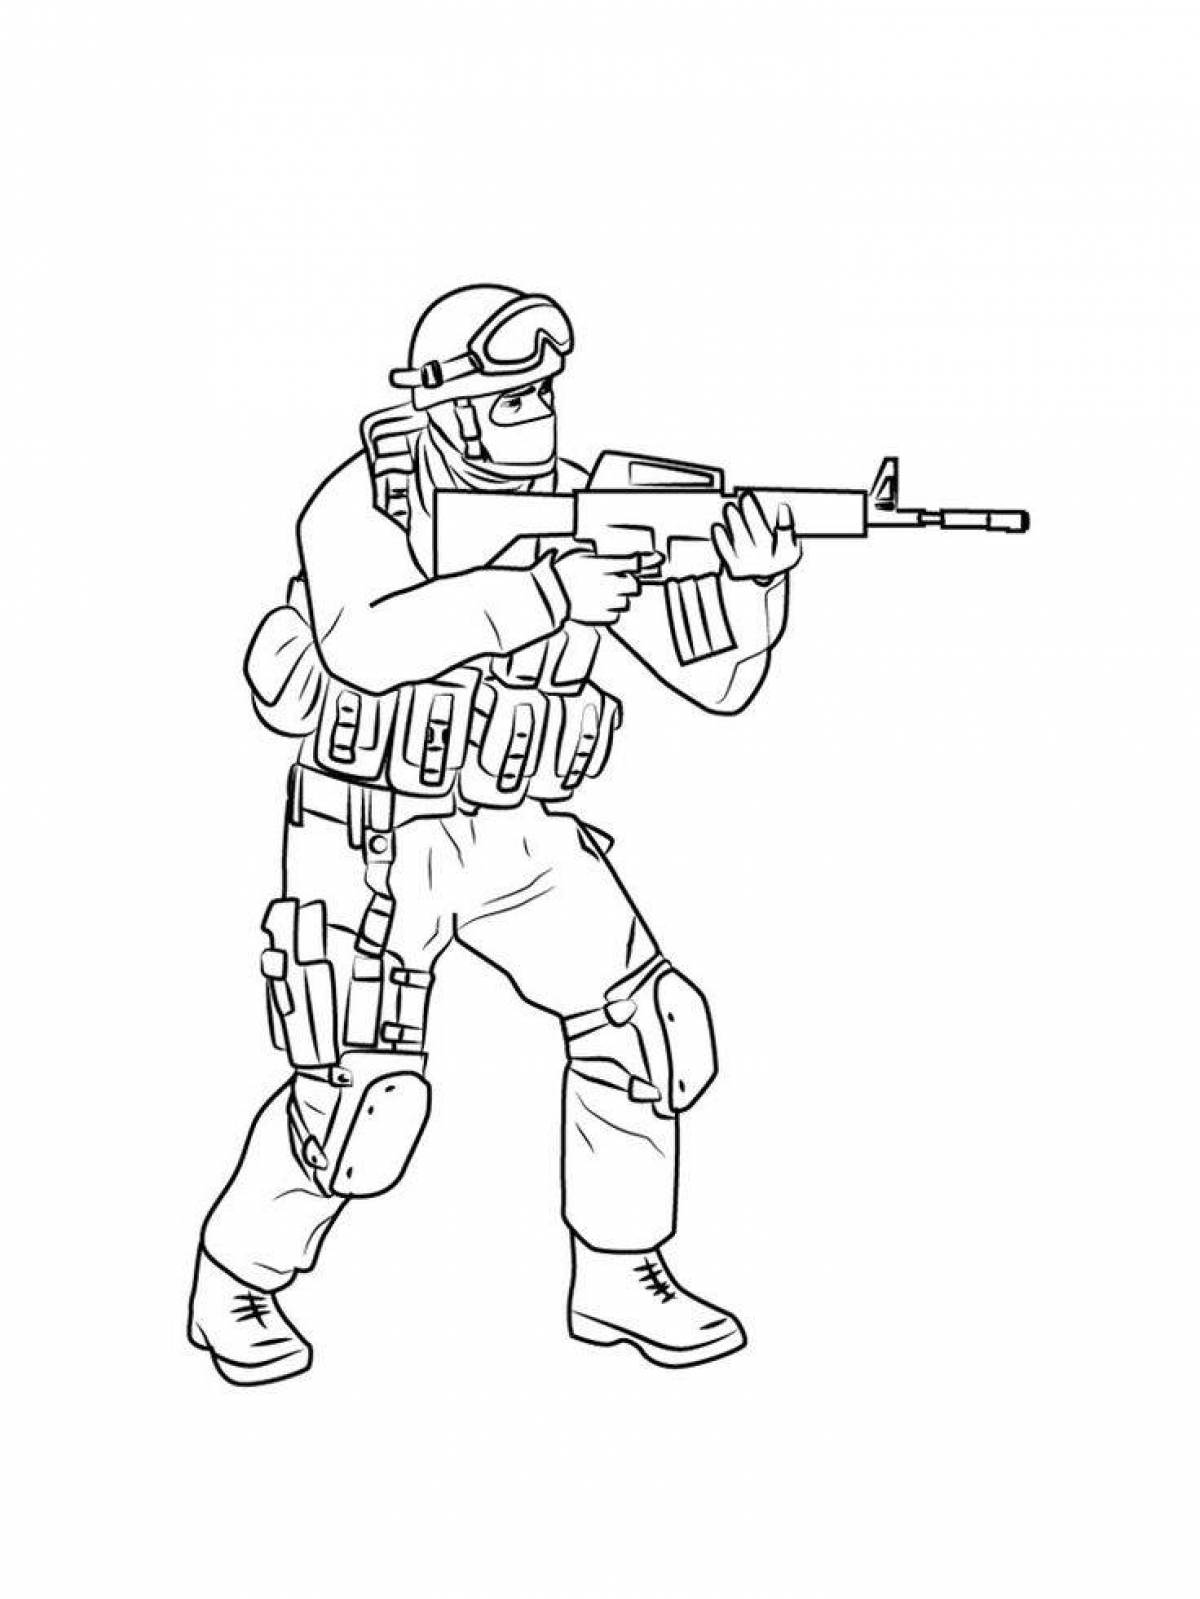 Impressive special forces coloring page